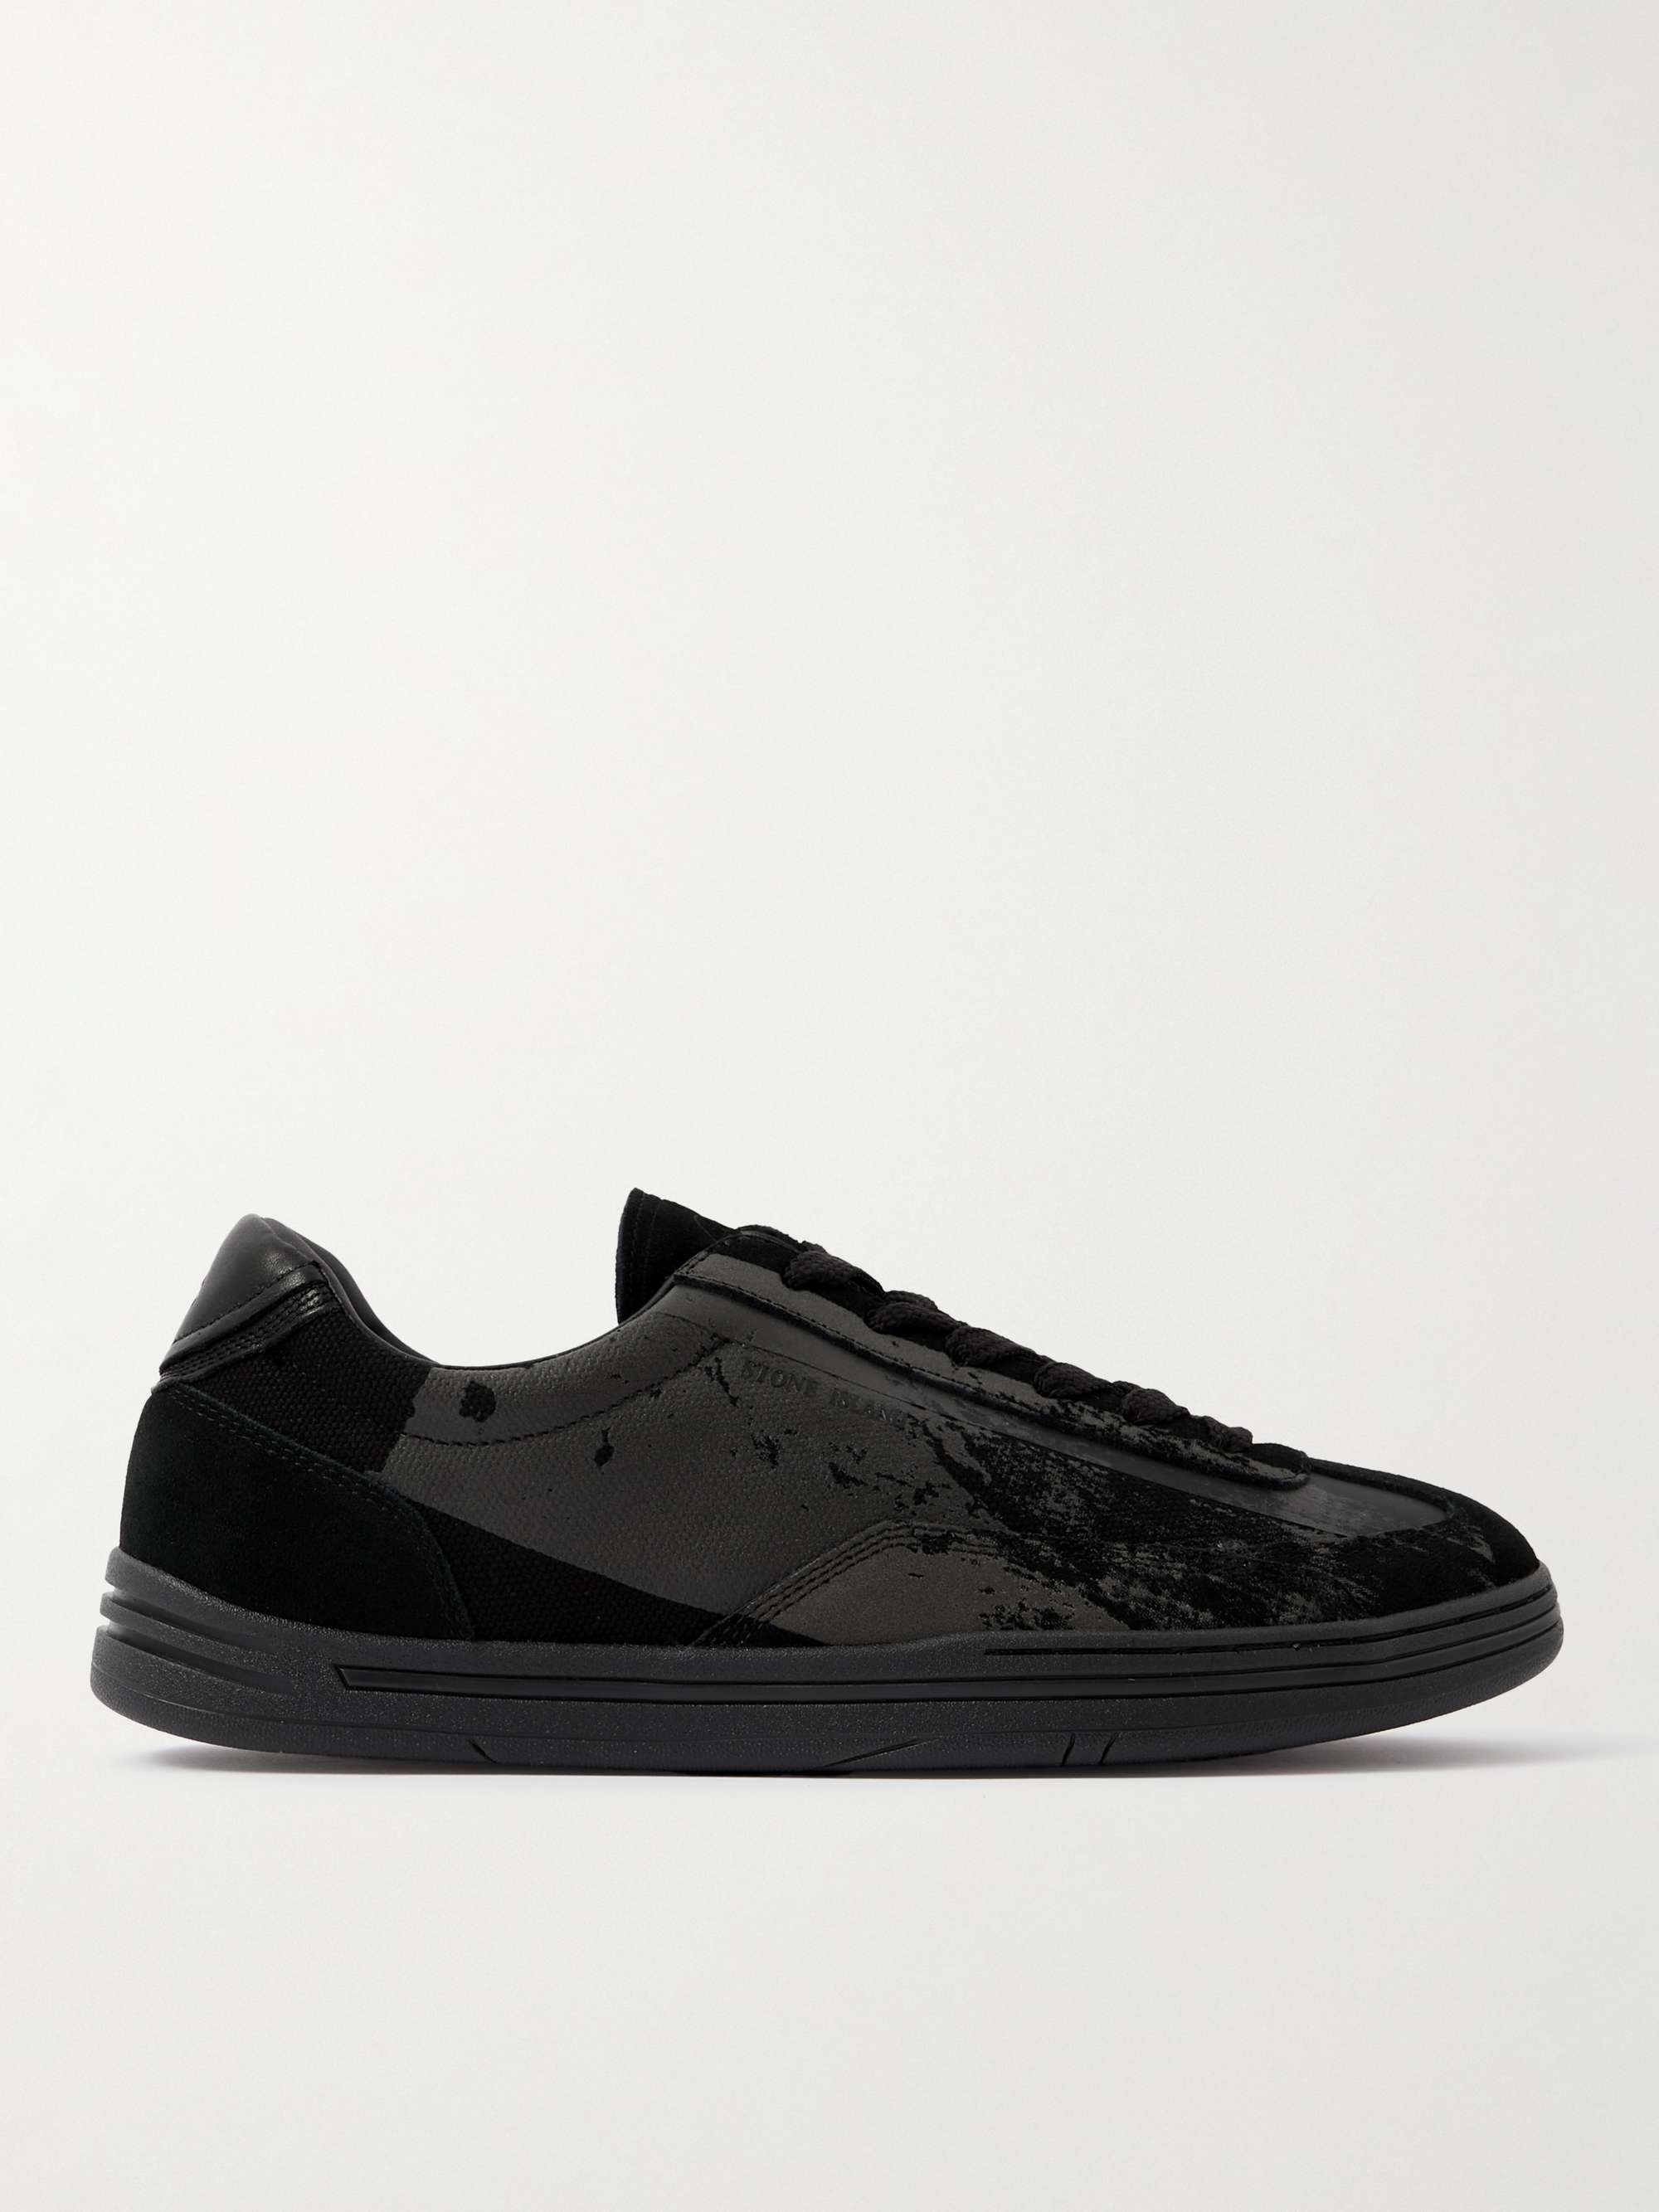 Stone Island Rock Shoes Military Green | STASHED